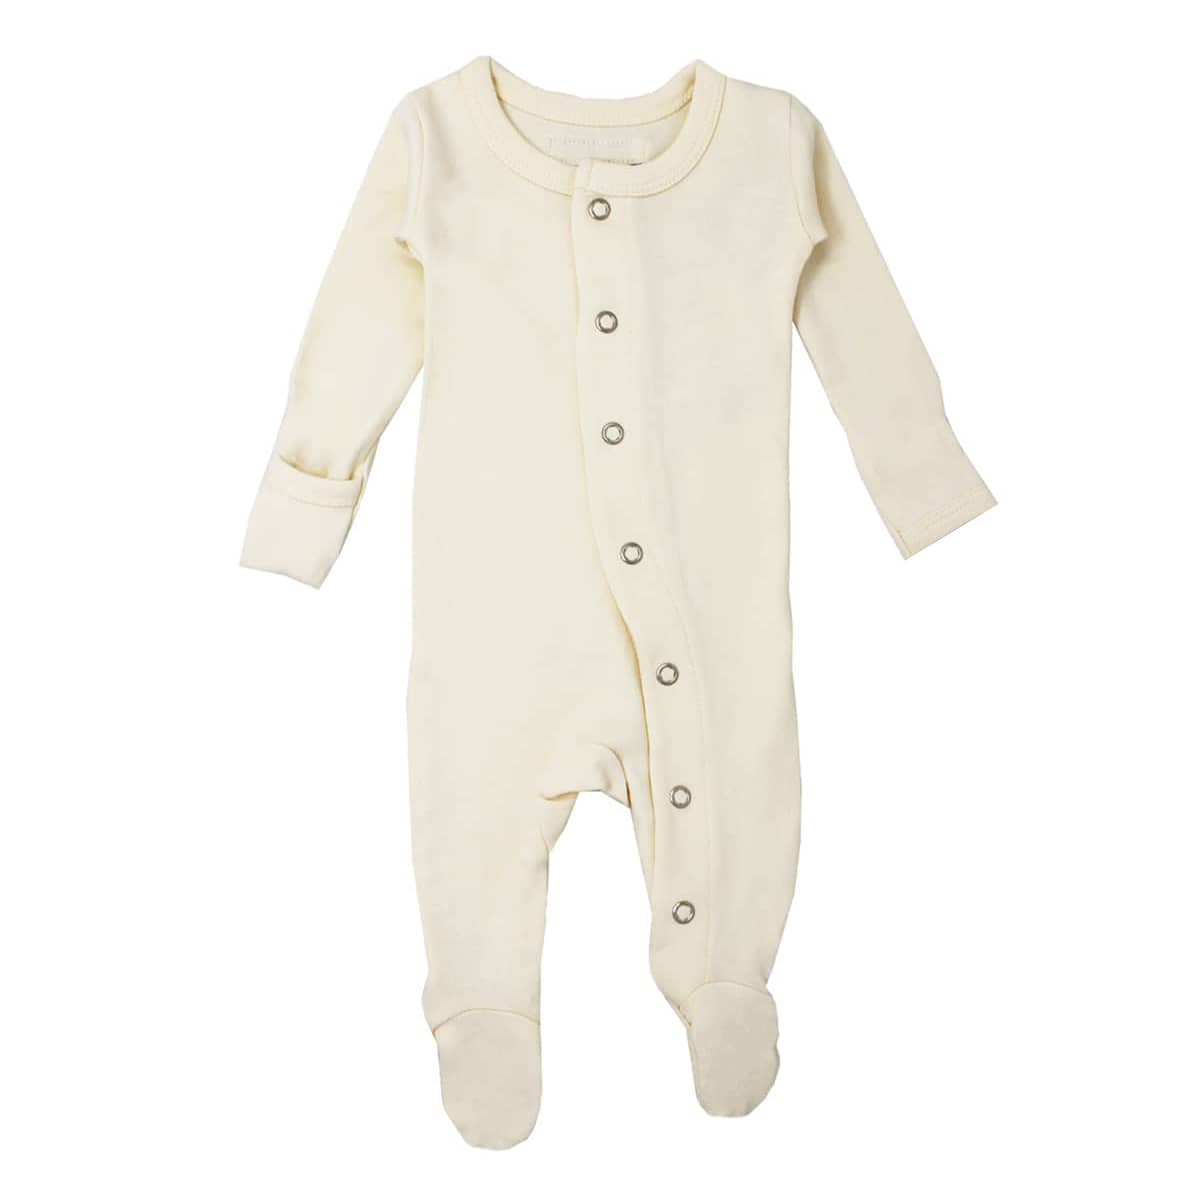 L'ovedbaby Organic Gl'oved Footed Overall - Buttercream